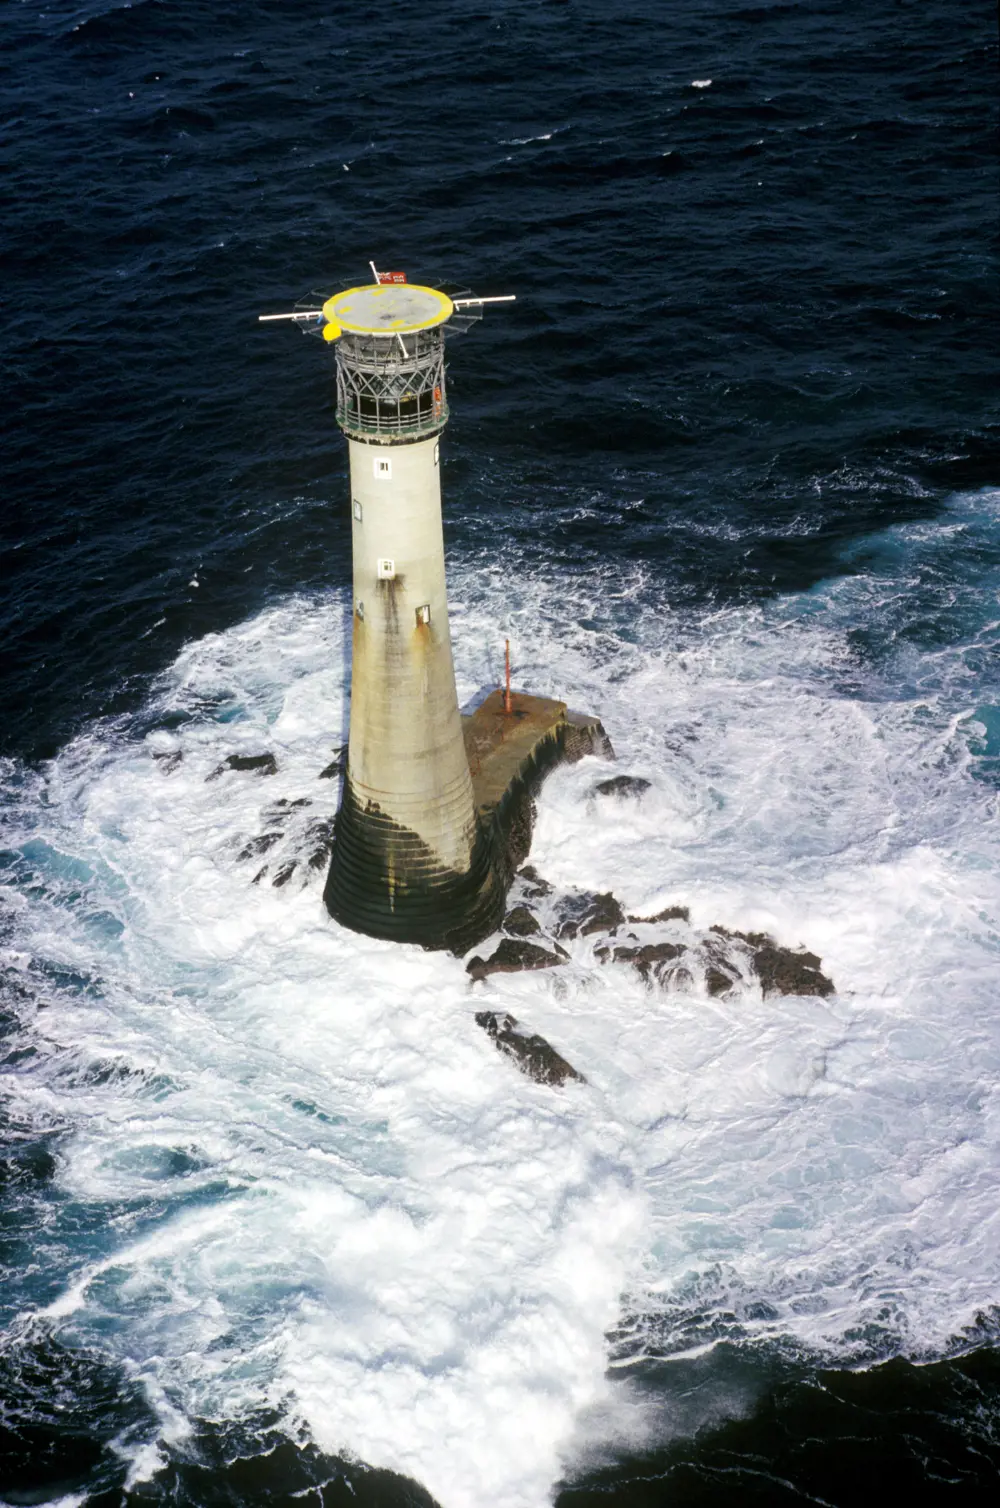 A lighthouse viewed from above. The lighthouse is surrounded by swirling water and topped with a helipad.